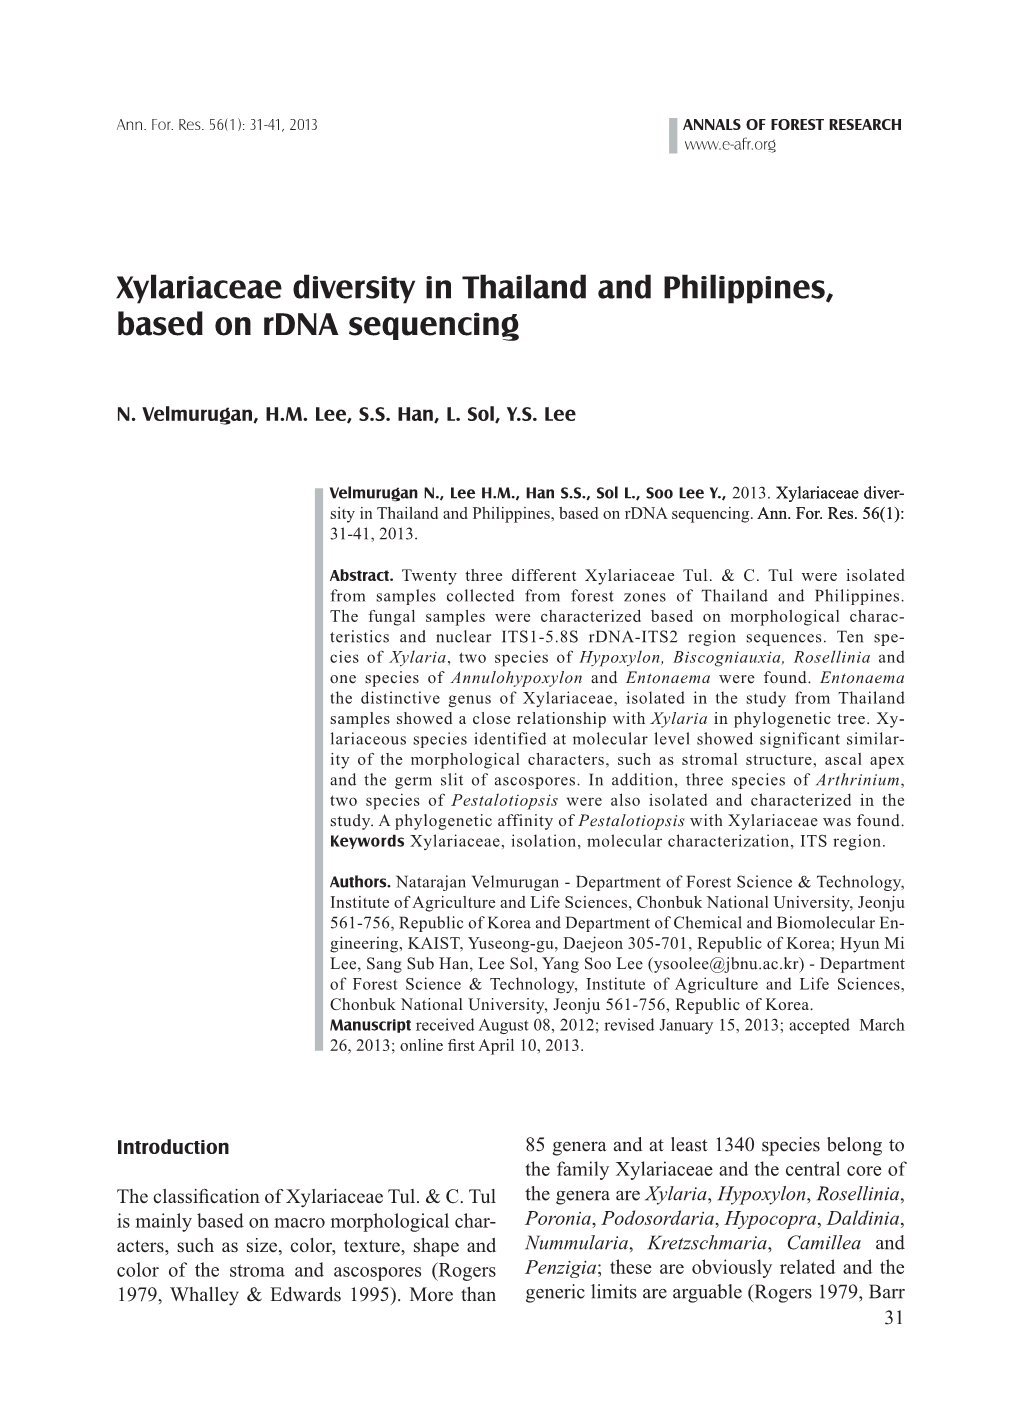 Xylariaceae Diversity in Thailand and Philippines, Based on Rdna Sequencing